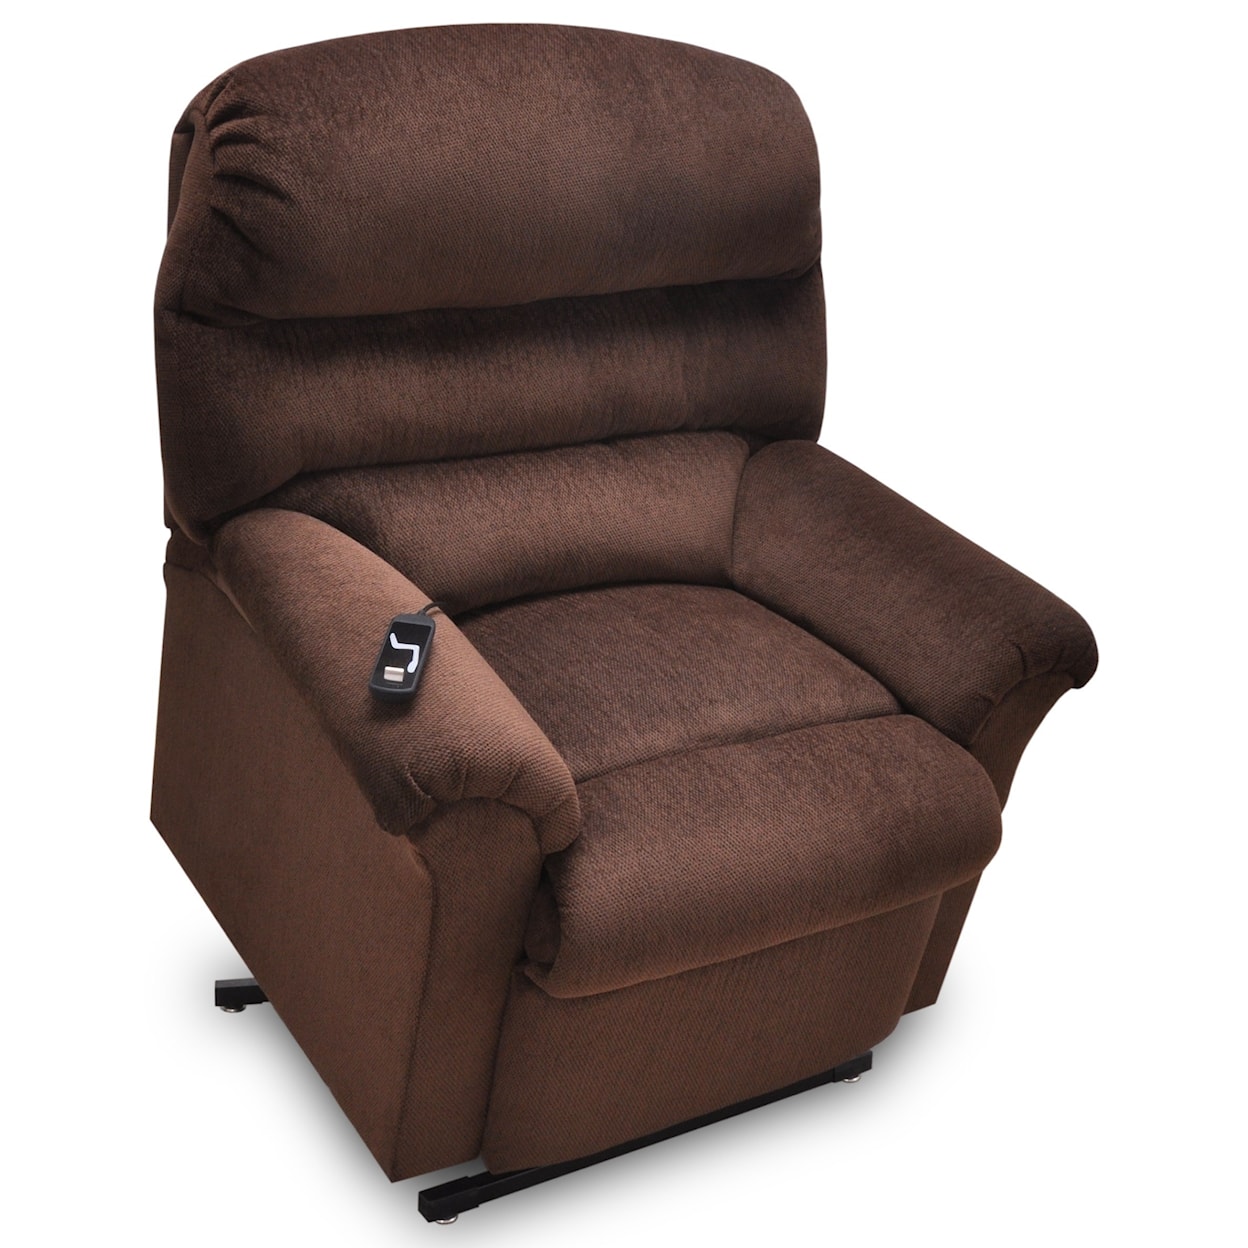 Franklin Franklin Recliners Chase Lift Recliner